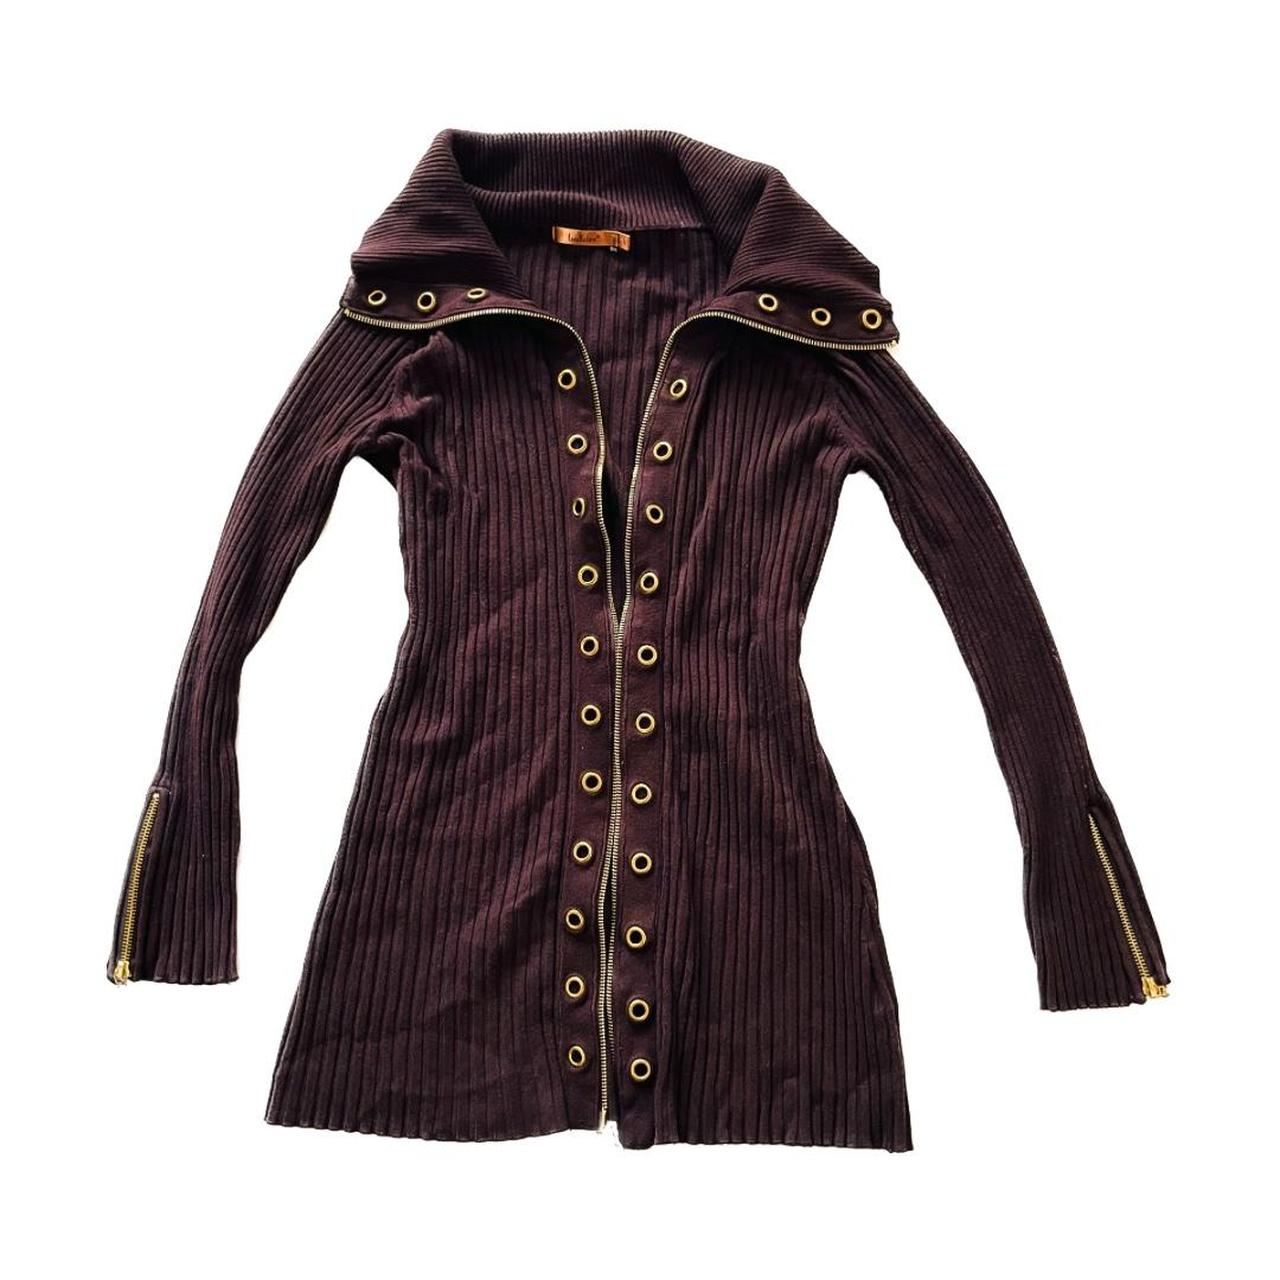 Belldini Women's Brown and Gold Cardigan